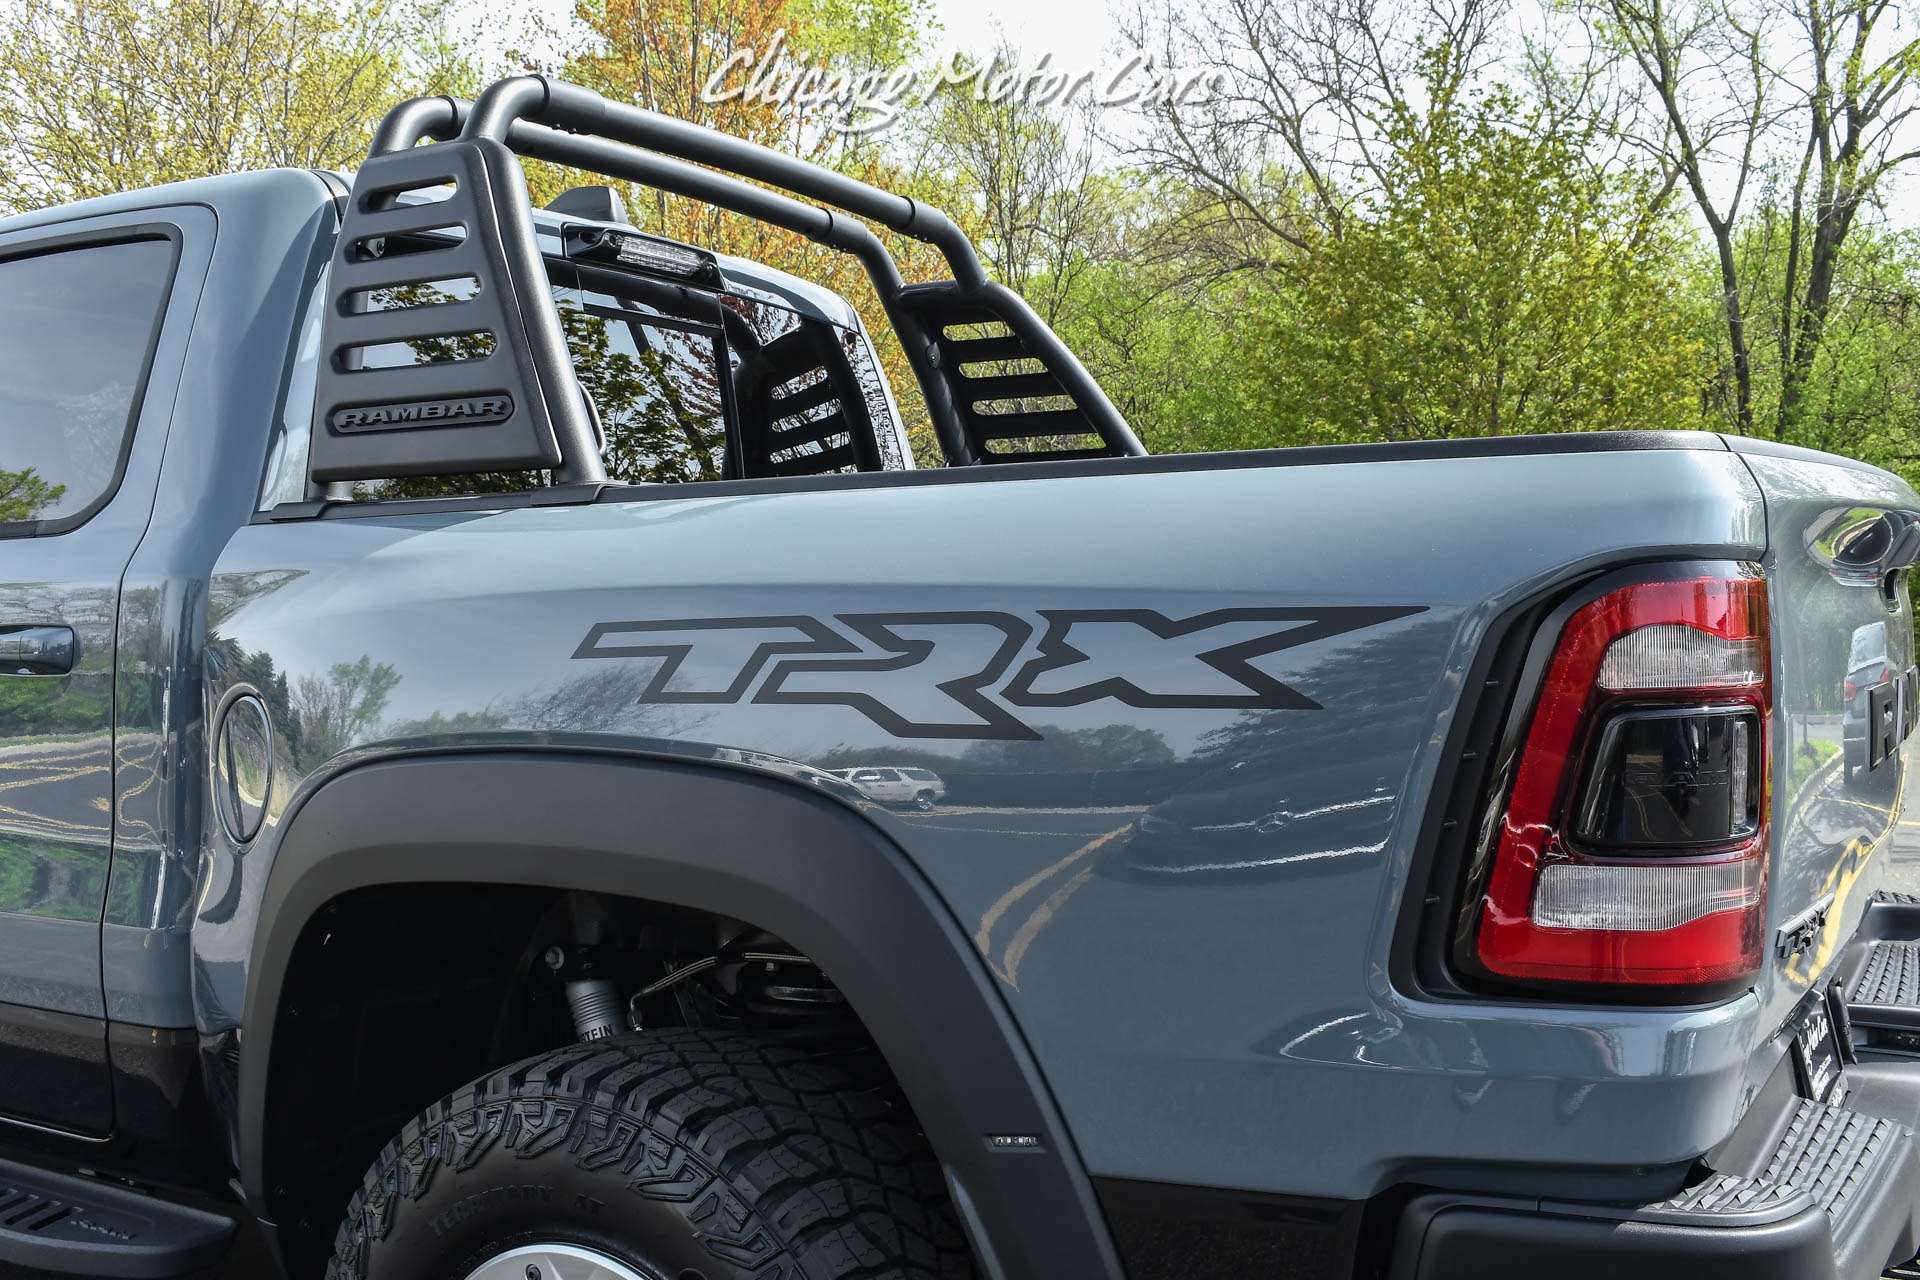 used ram trx for sale